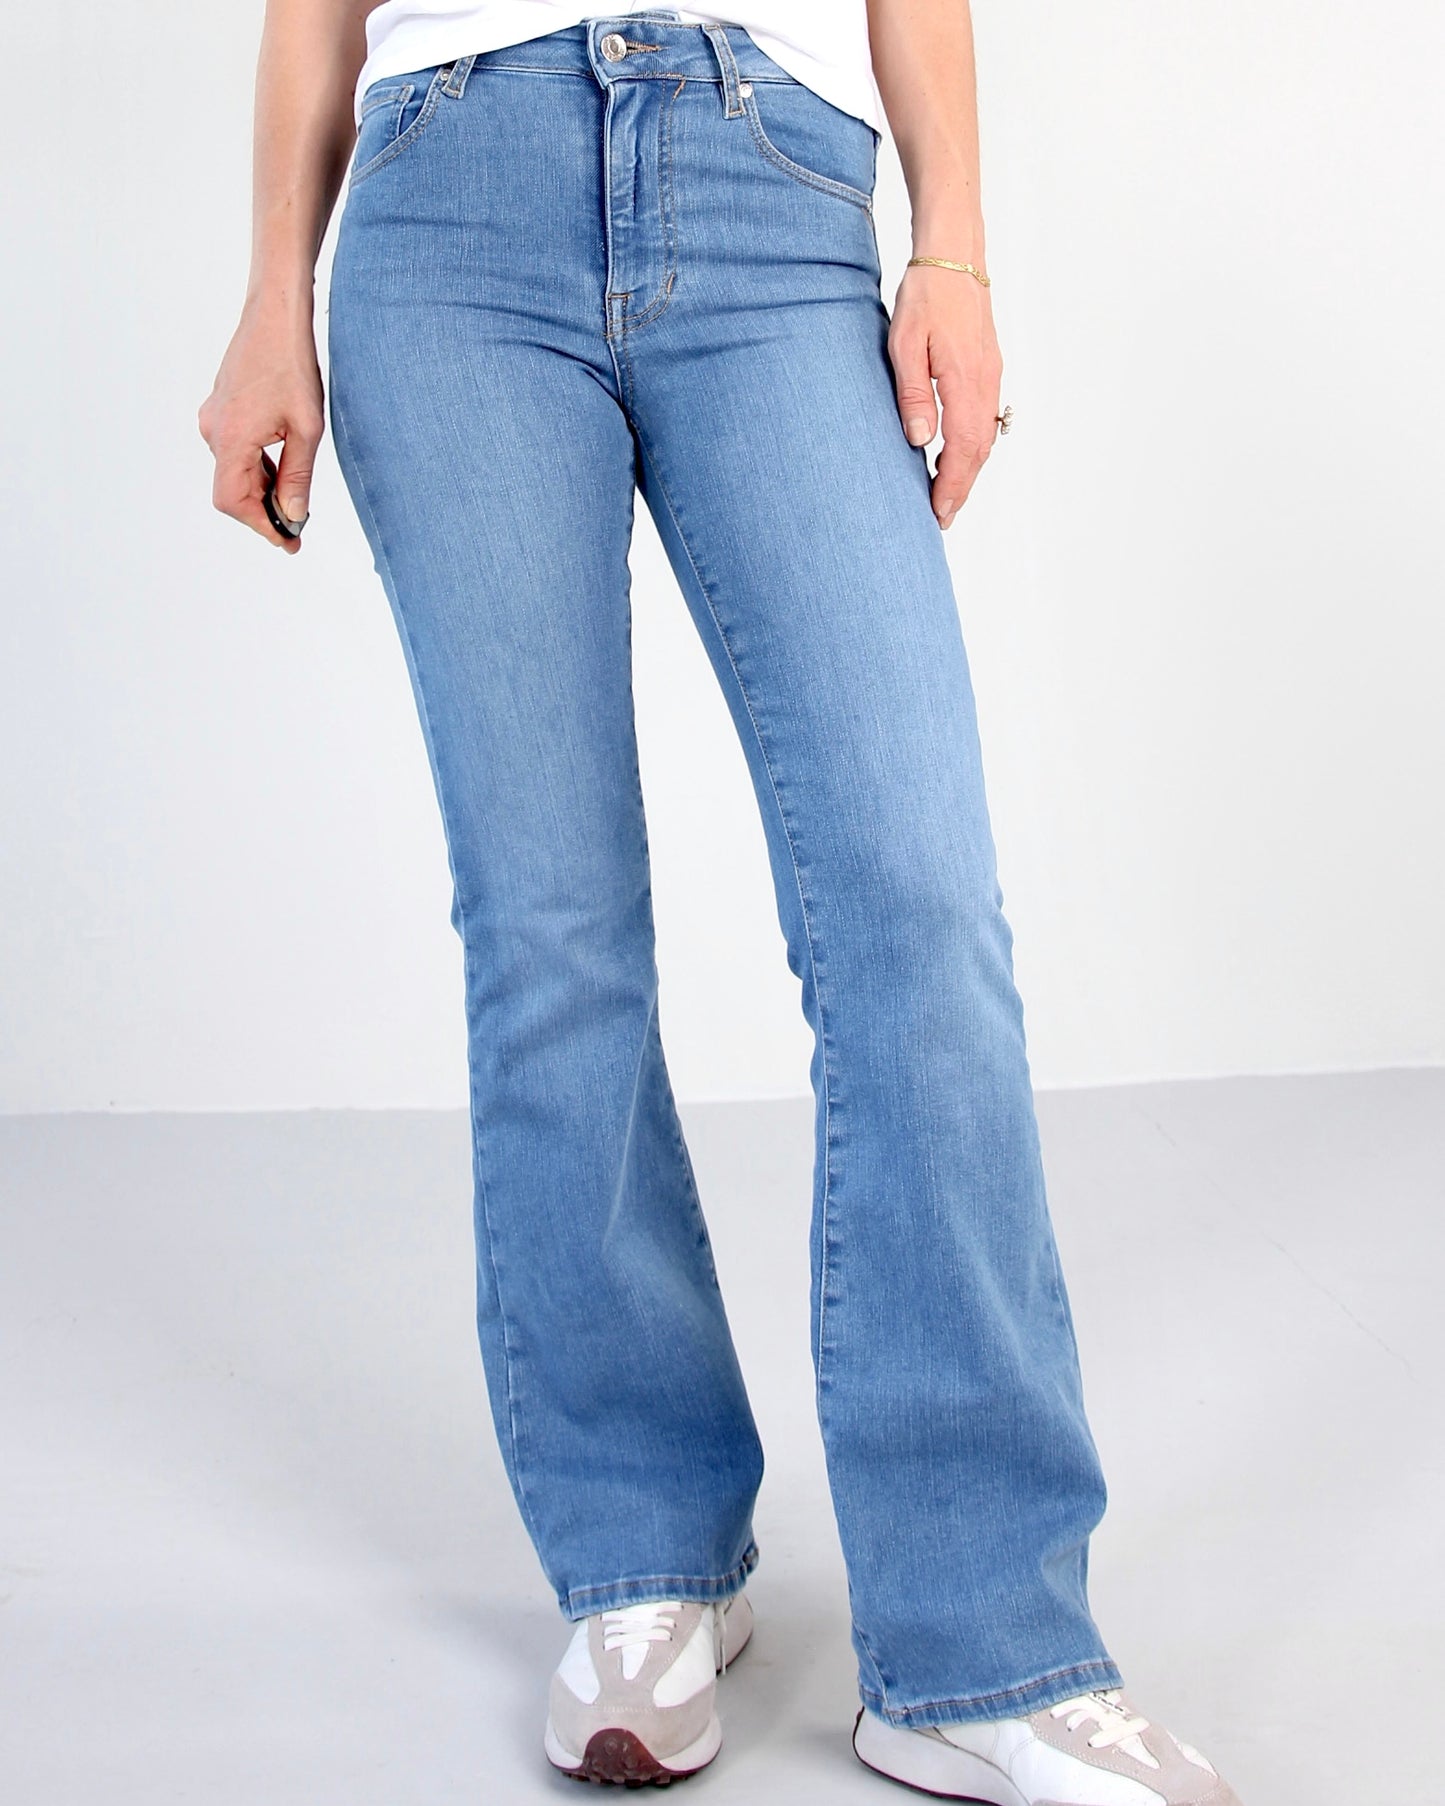 Wesley Riviera blue Jeans - Dame - Bootcut - Flare - High waist - Stretchy